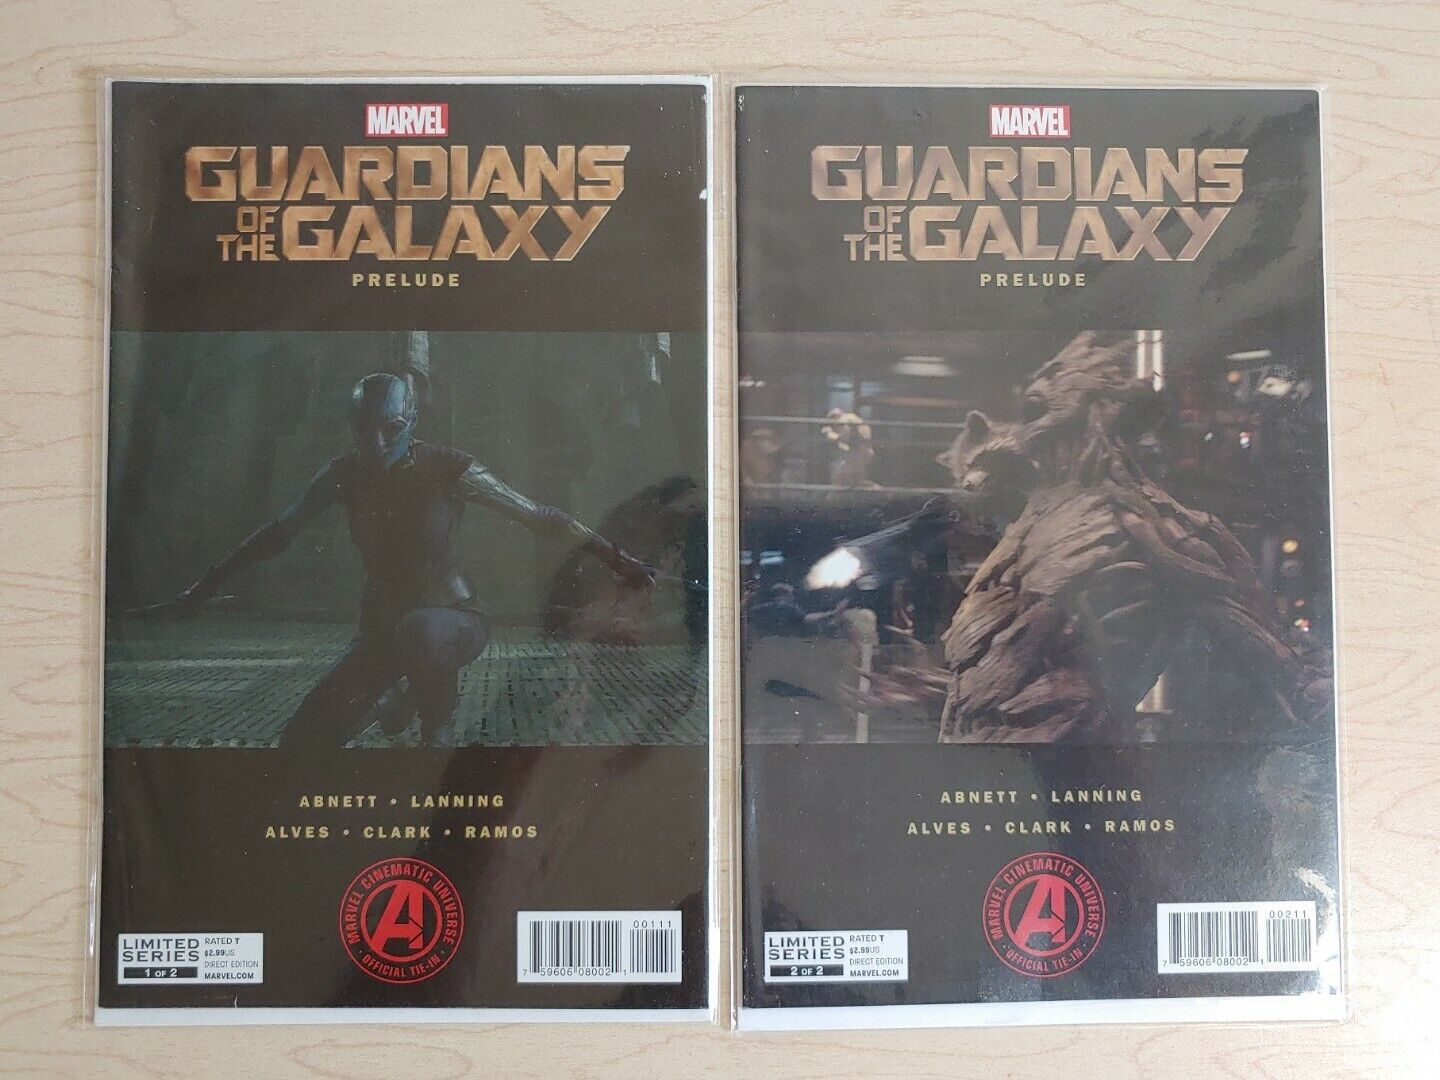 Marvel Comics Guardians Of The Galaxy Prelude Issues #1-2 - VGC + Bag/Board